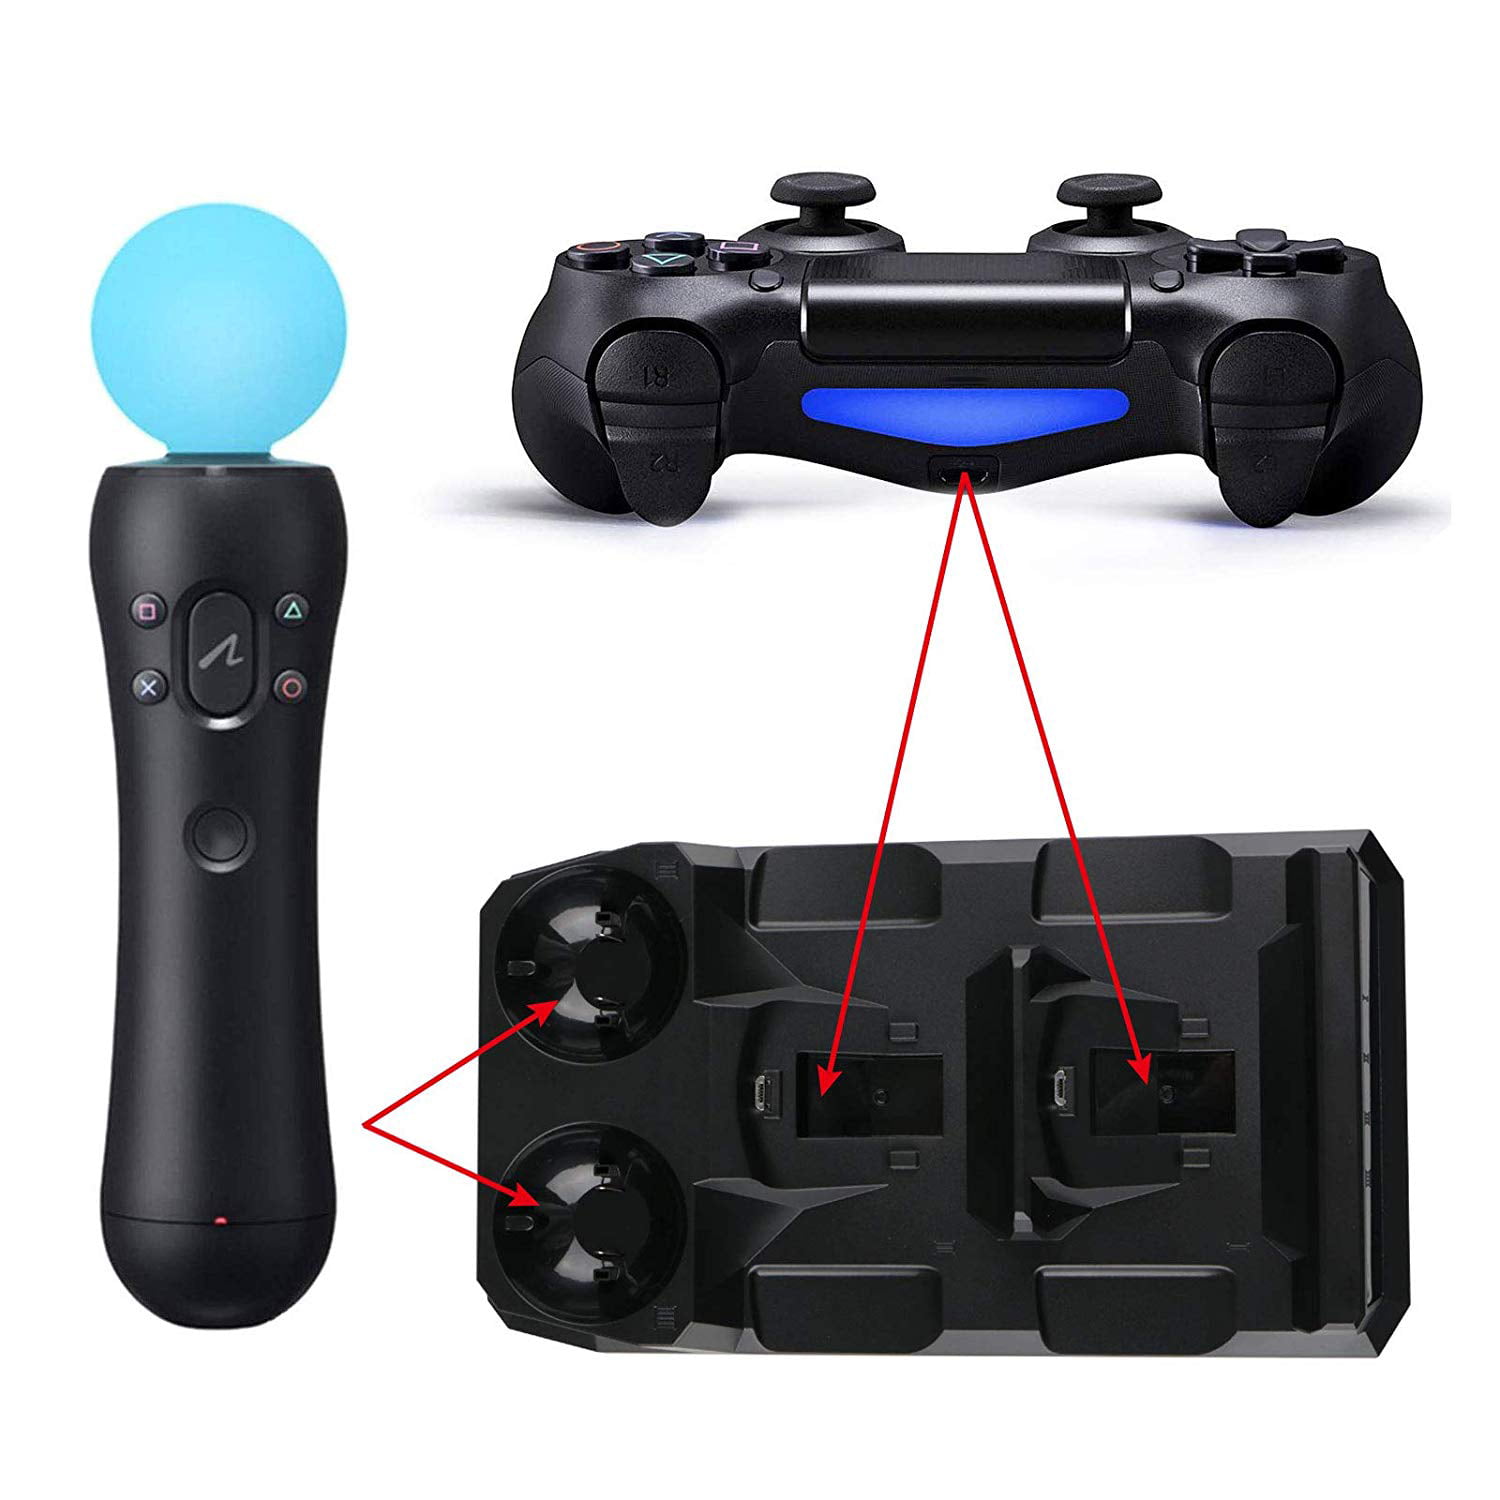 psvr move controller with joystick